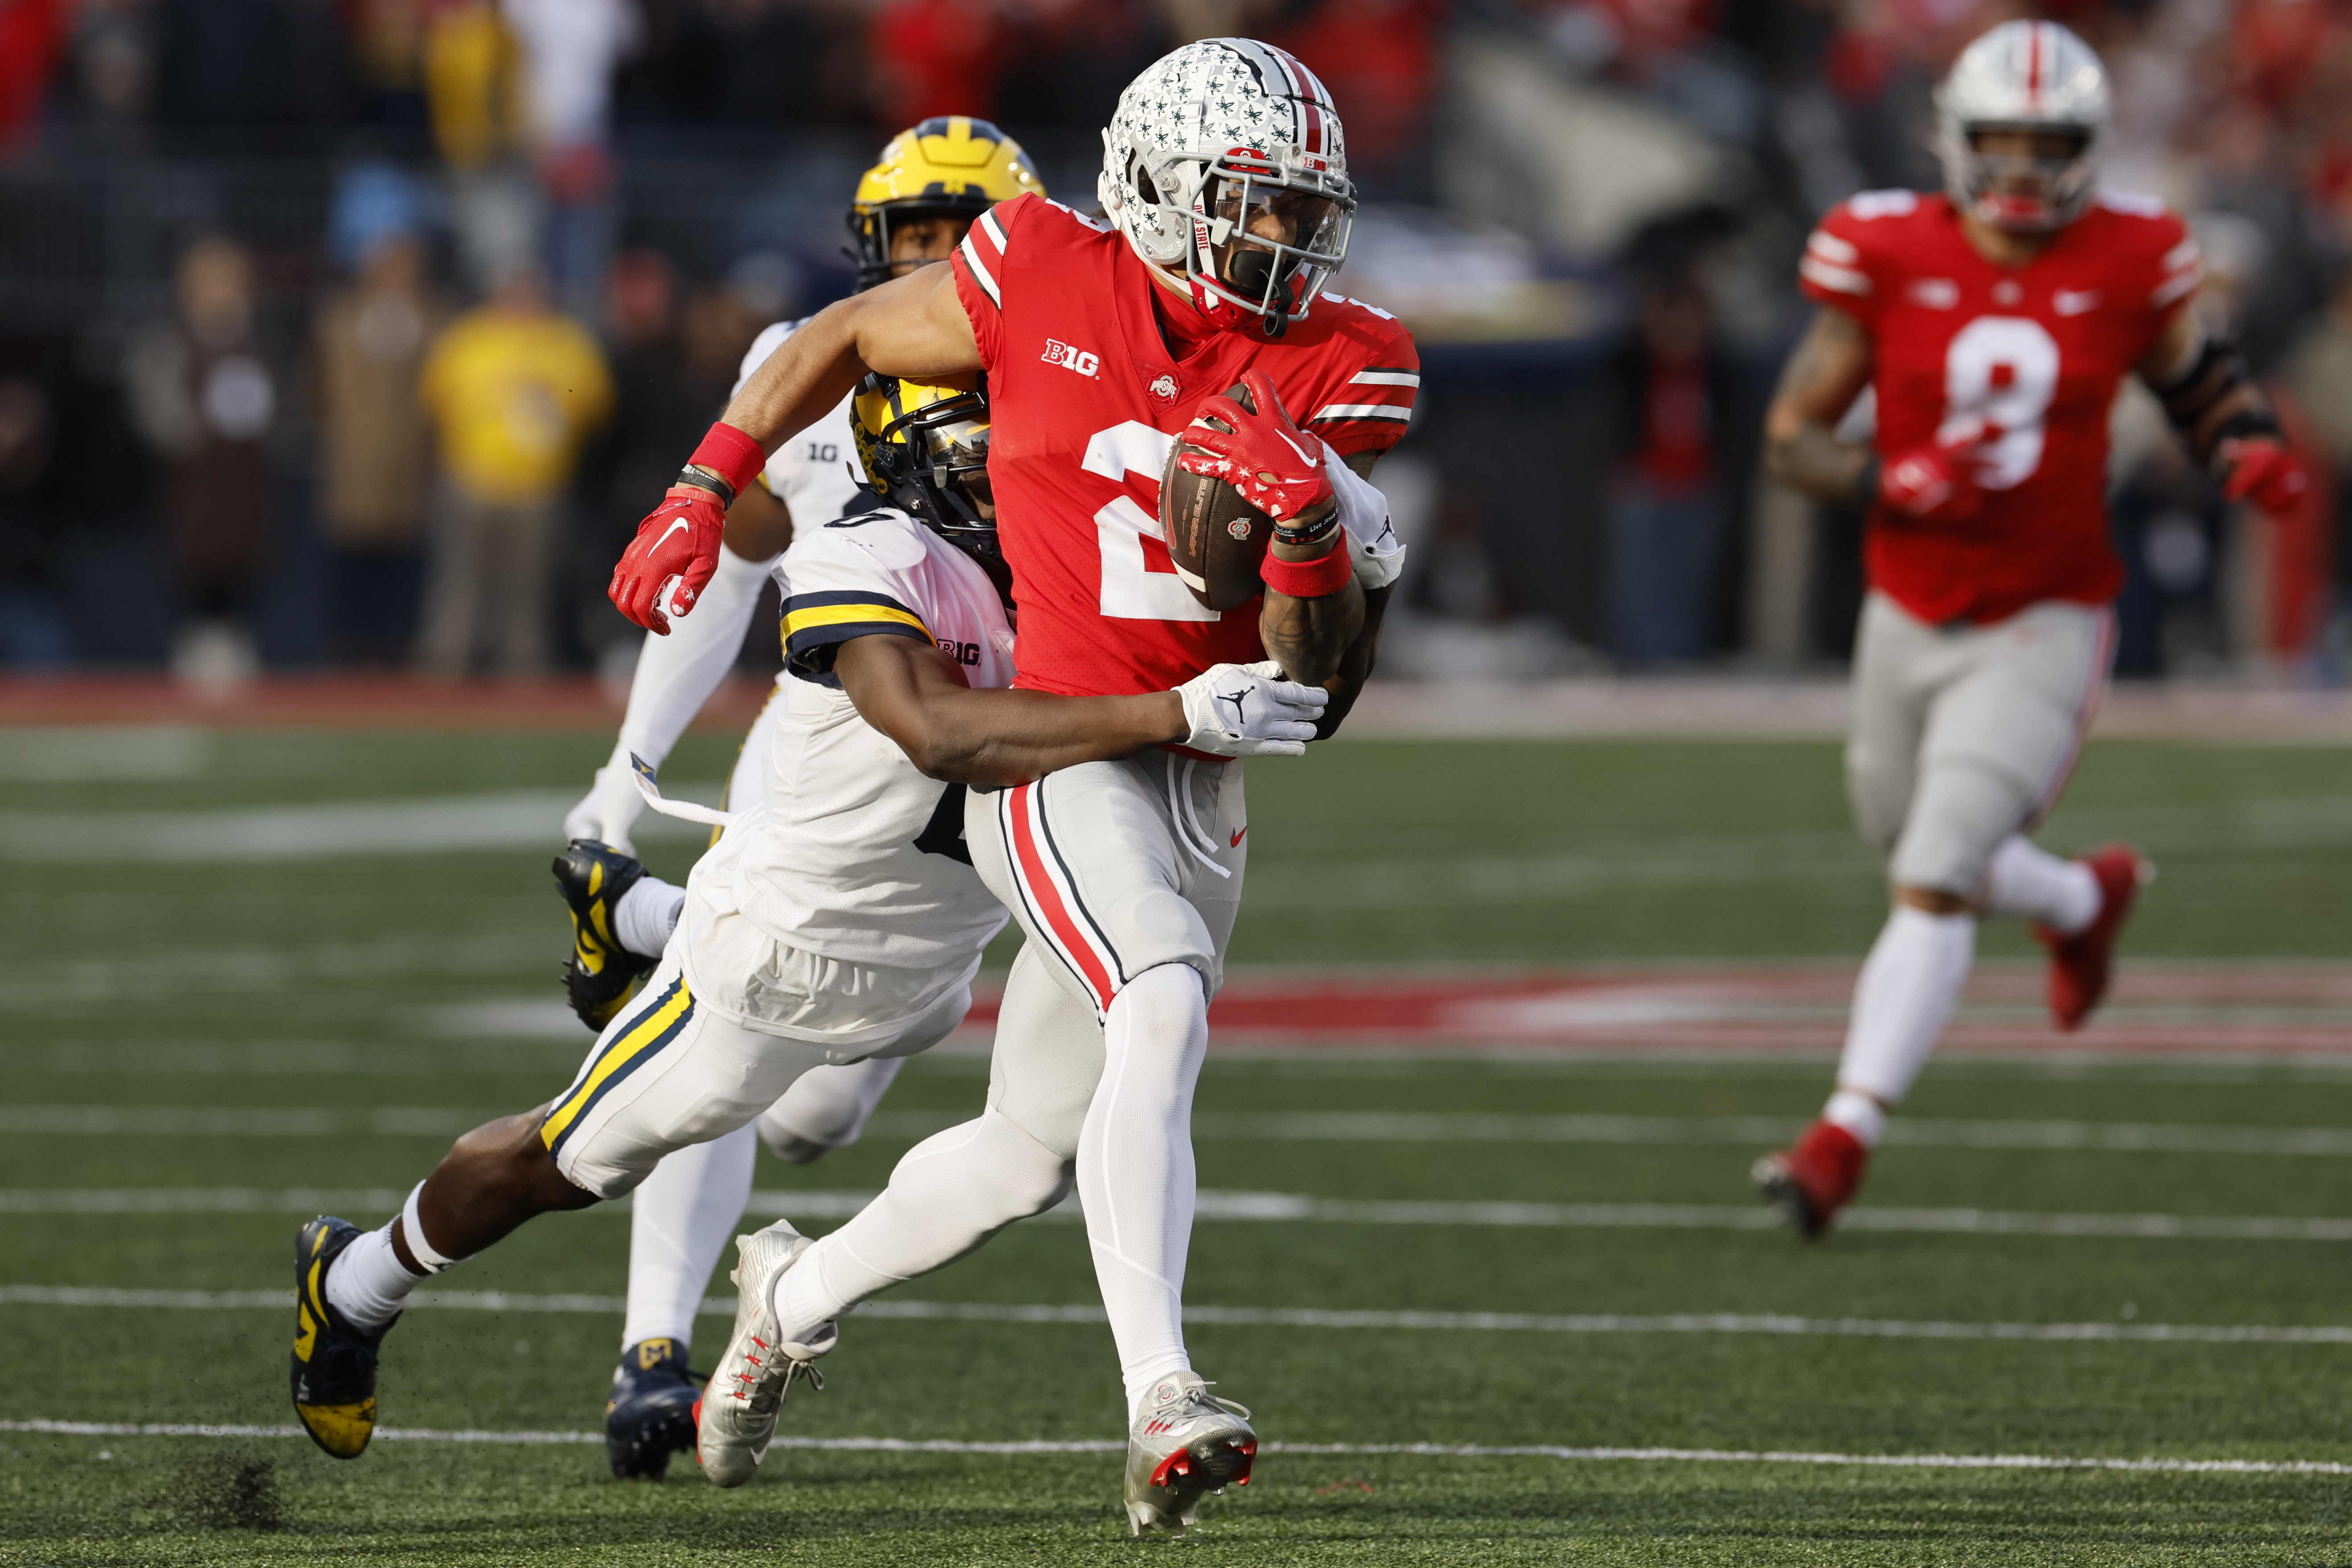 How to bet Ohio State football as an underdog at Michigan in The Game